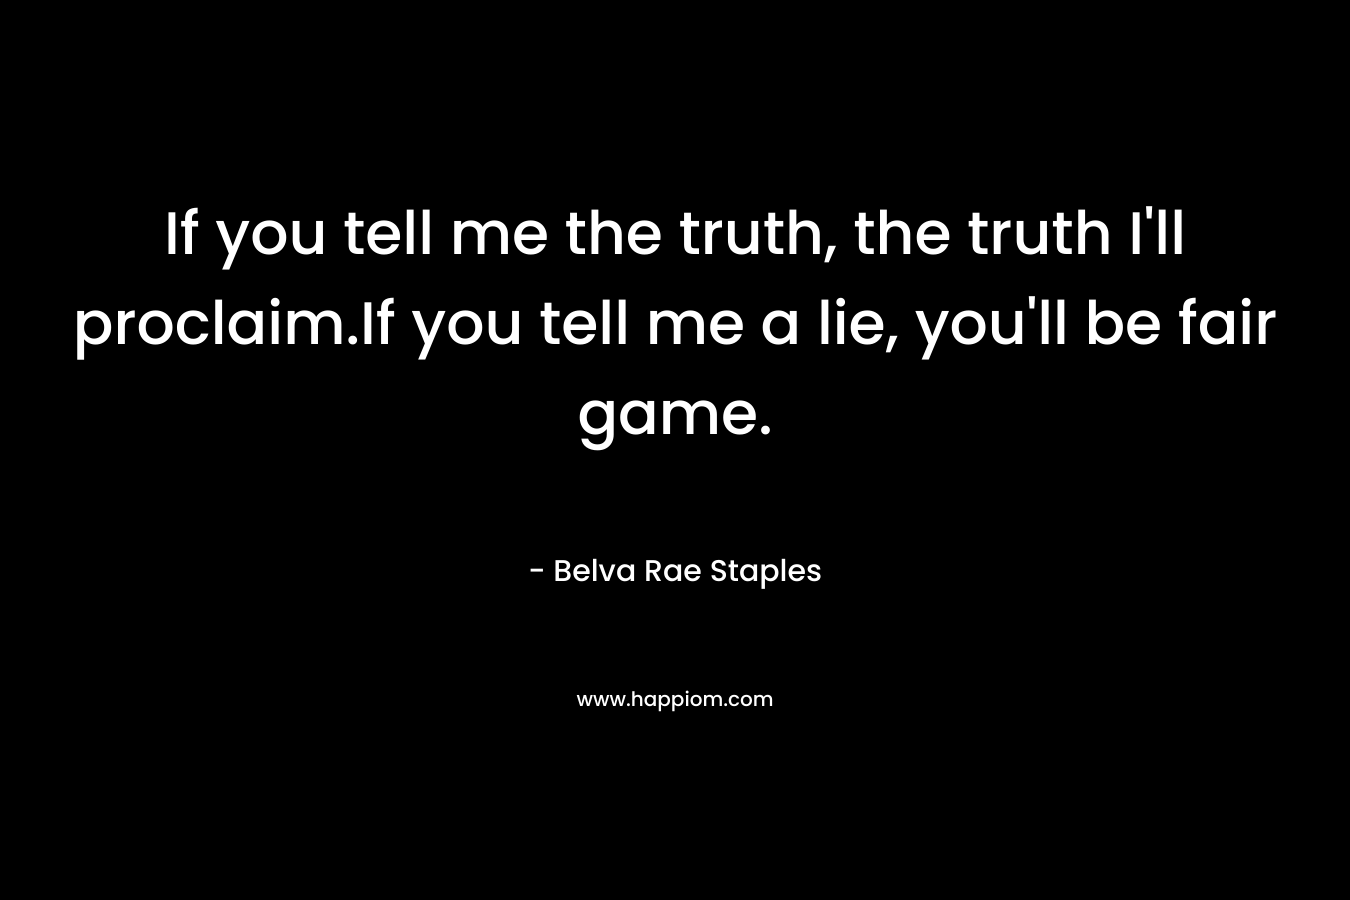 If you tell me the truth, the truth I’ll proclaim.If you tell me a lie, you’ll be fair game. – Belva Rae Staples